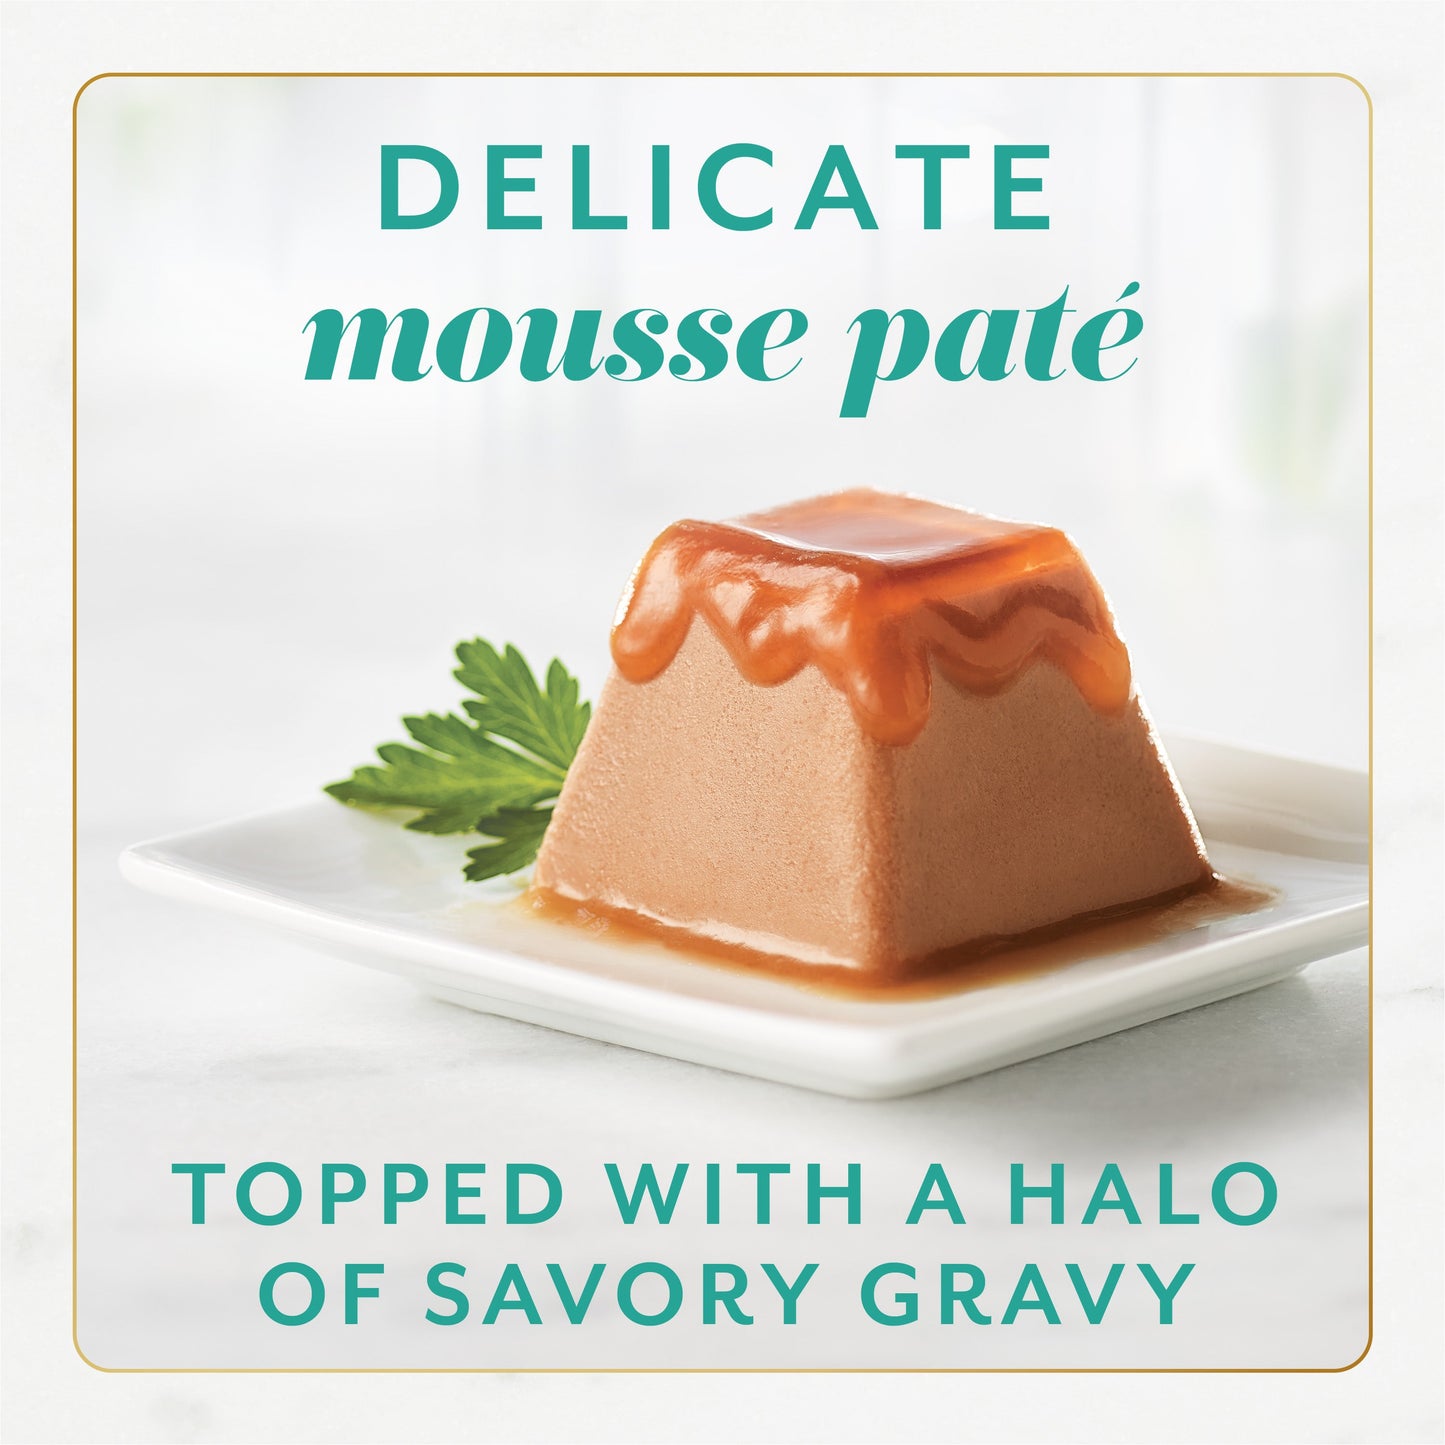 Delicate tuna mousse pate topped with a halo of savory gravy